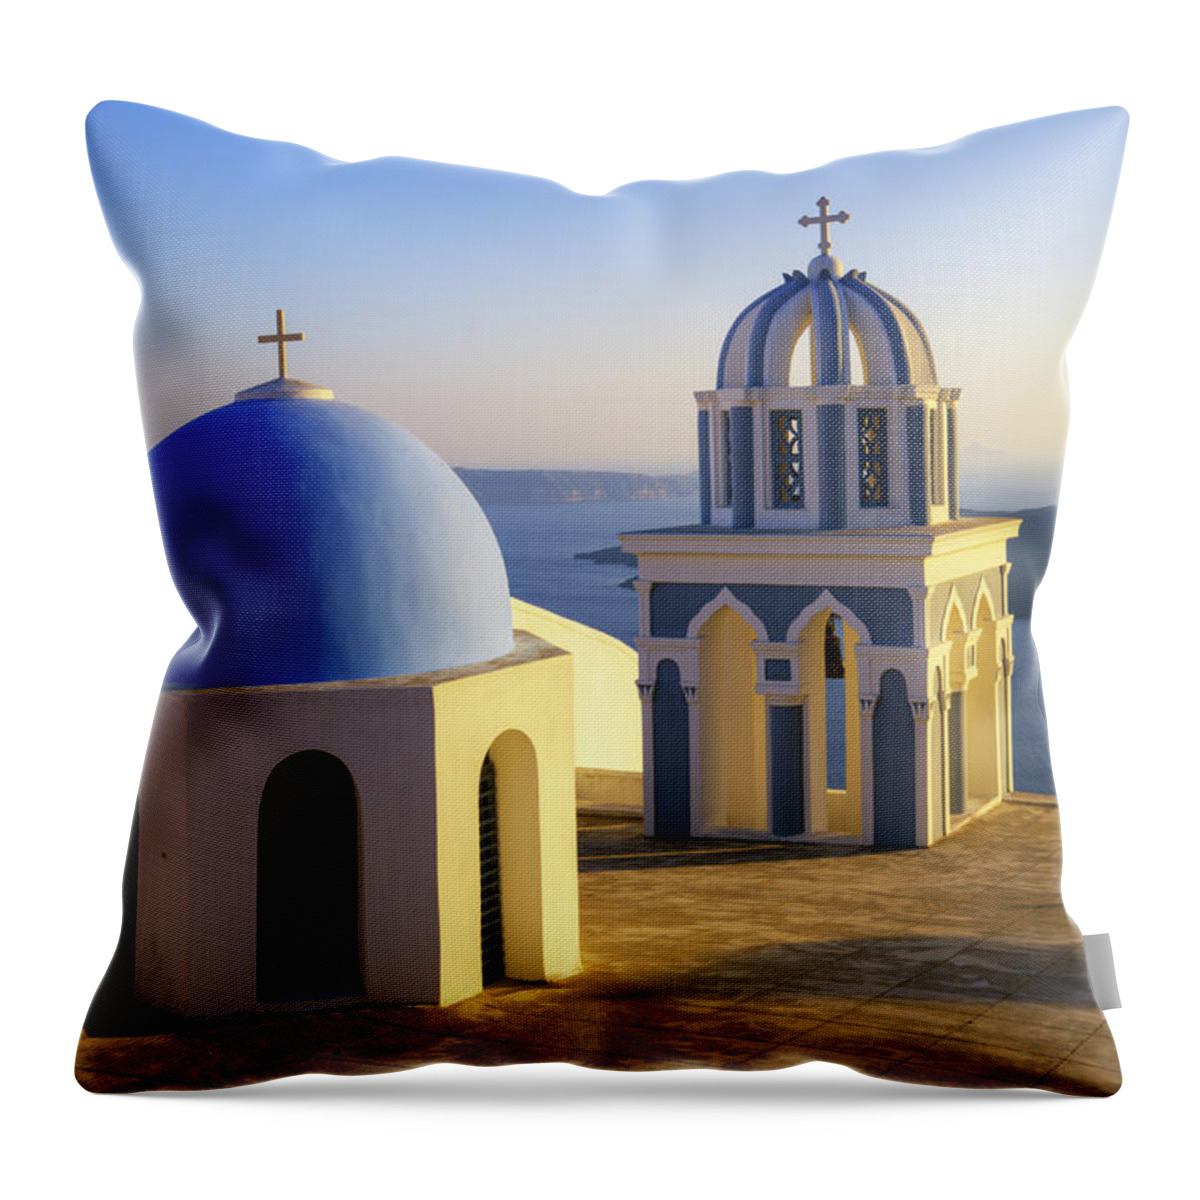 Greece Throw Pillow featuring the photograph Church At Firostefani Shortly Before by Wolfgang steiner